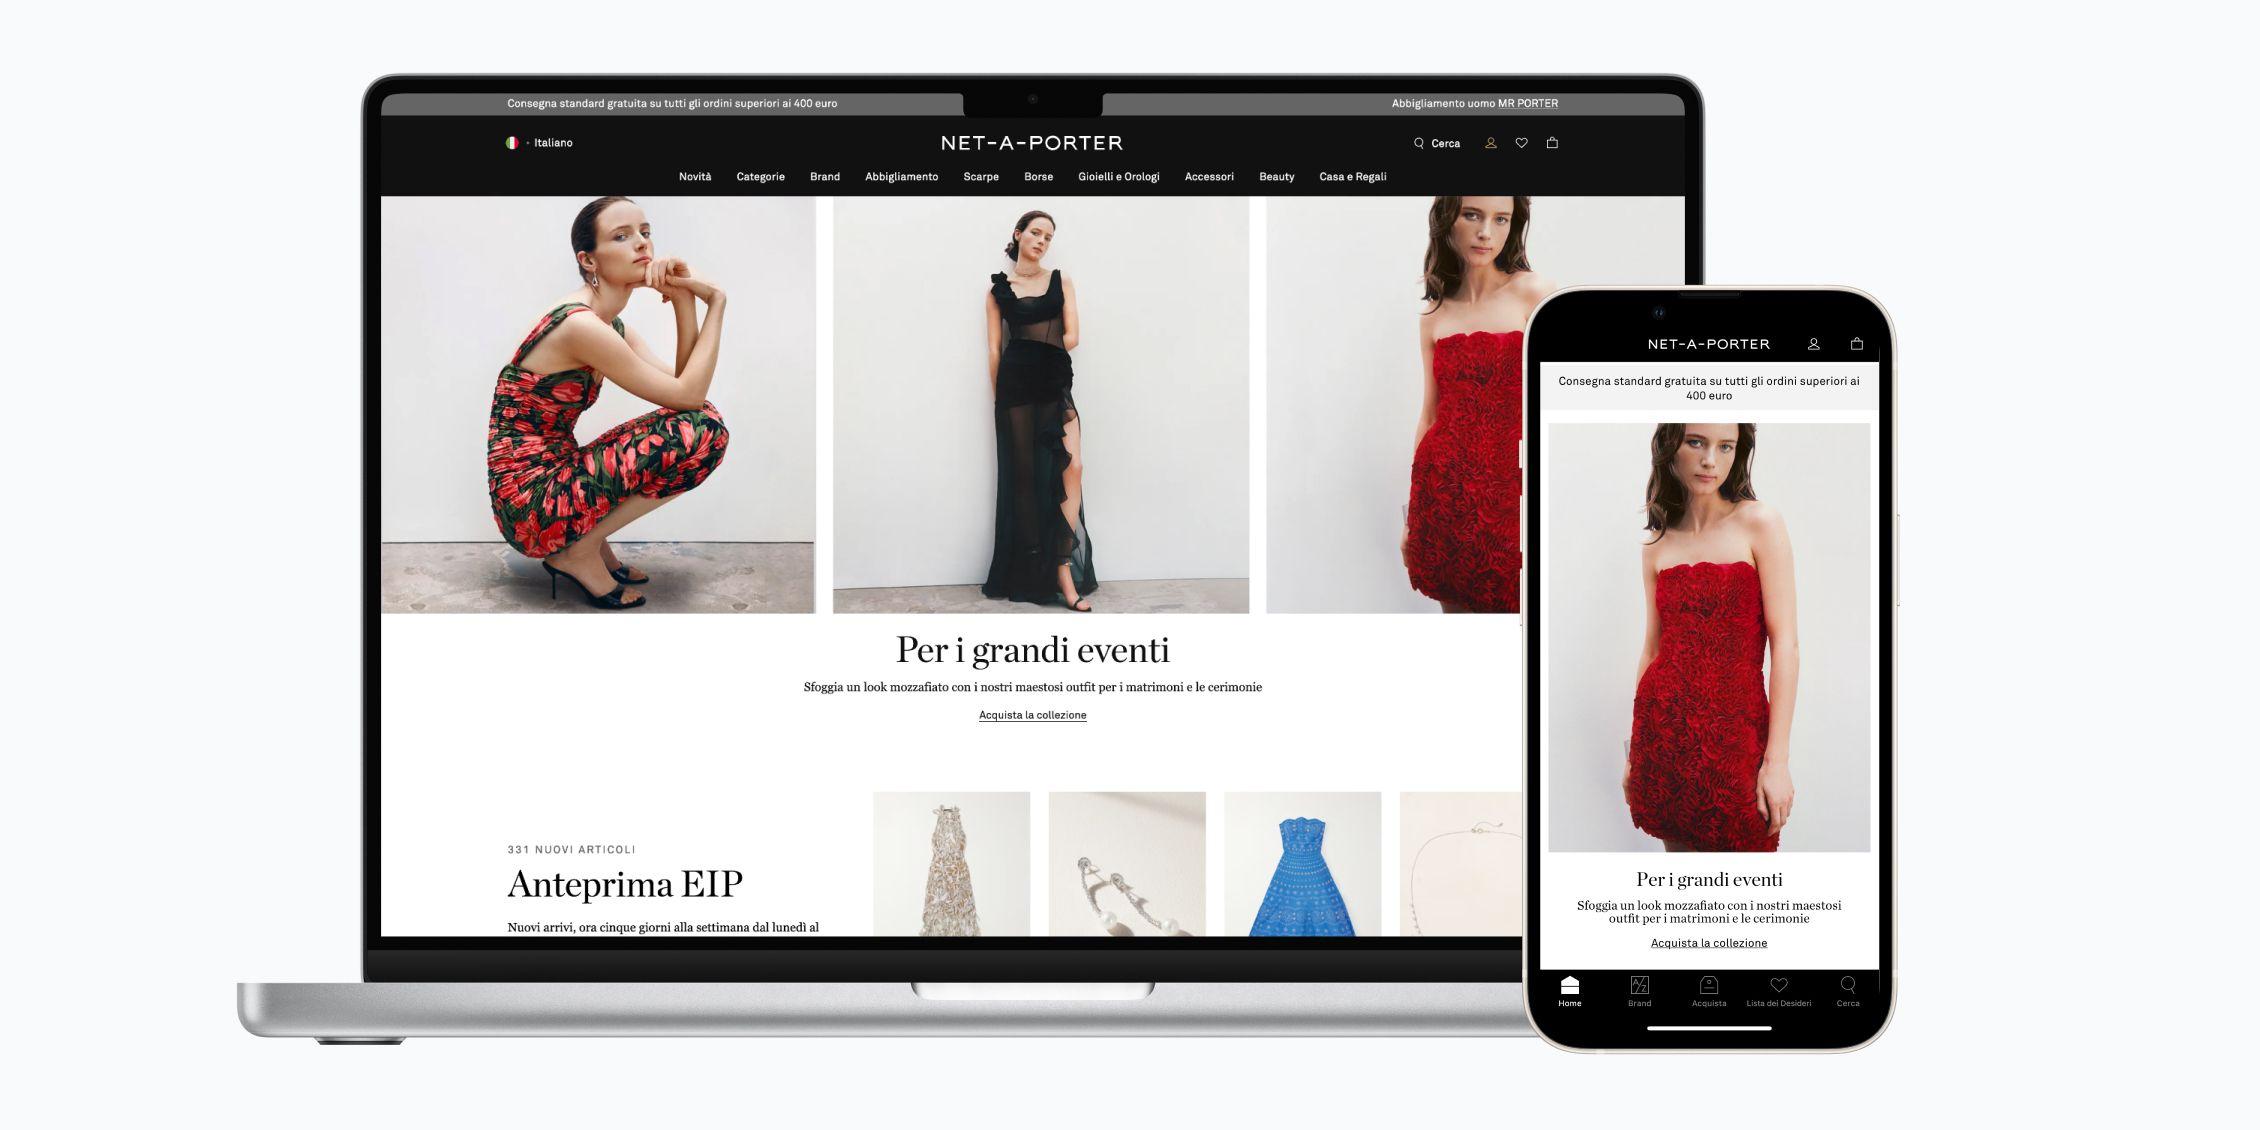 Read more about NET-A-PORTER Italian Localisation